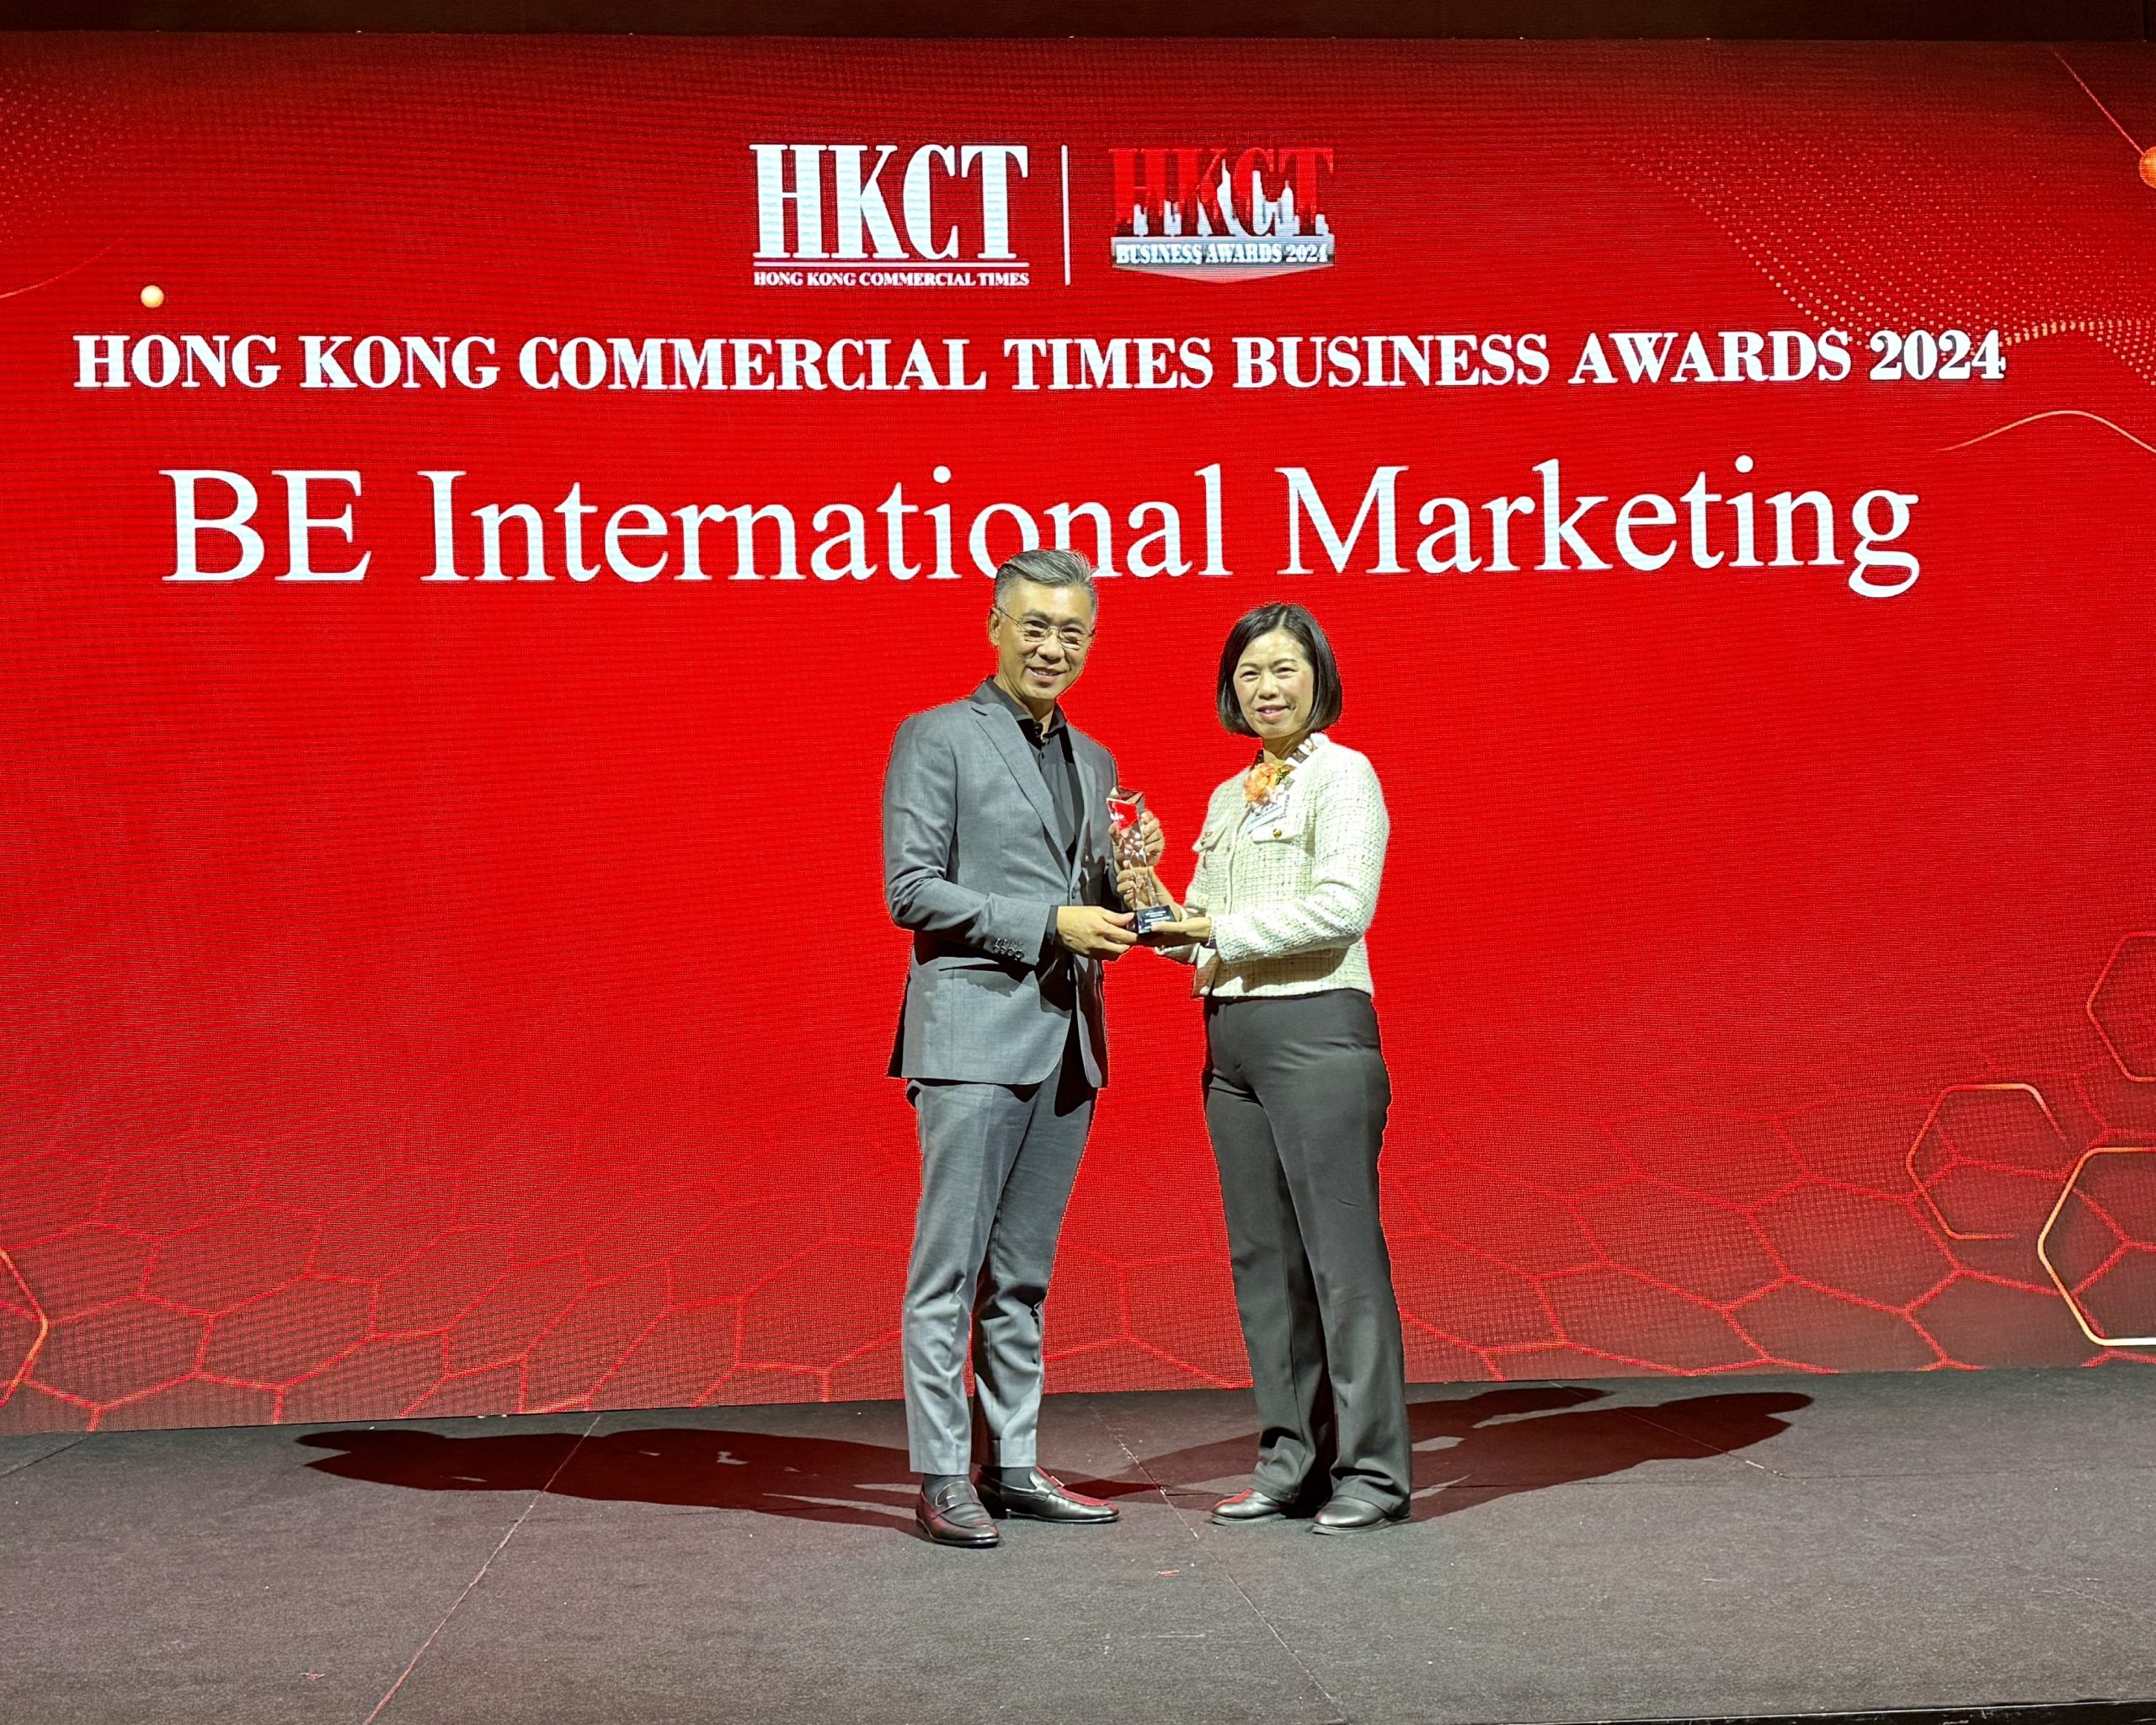 BE International Wins Major Hong Kong Award Again Crowned “Most Outstanding Nutrition Supplement Brand of The Year” at HKCT Business Award 2024.